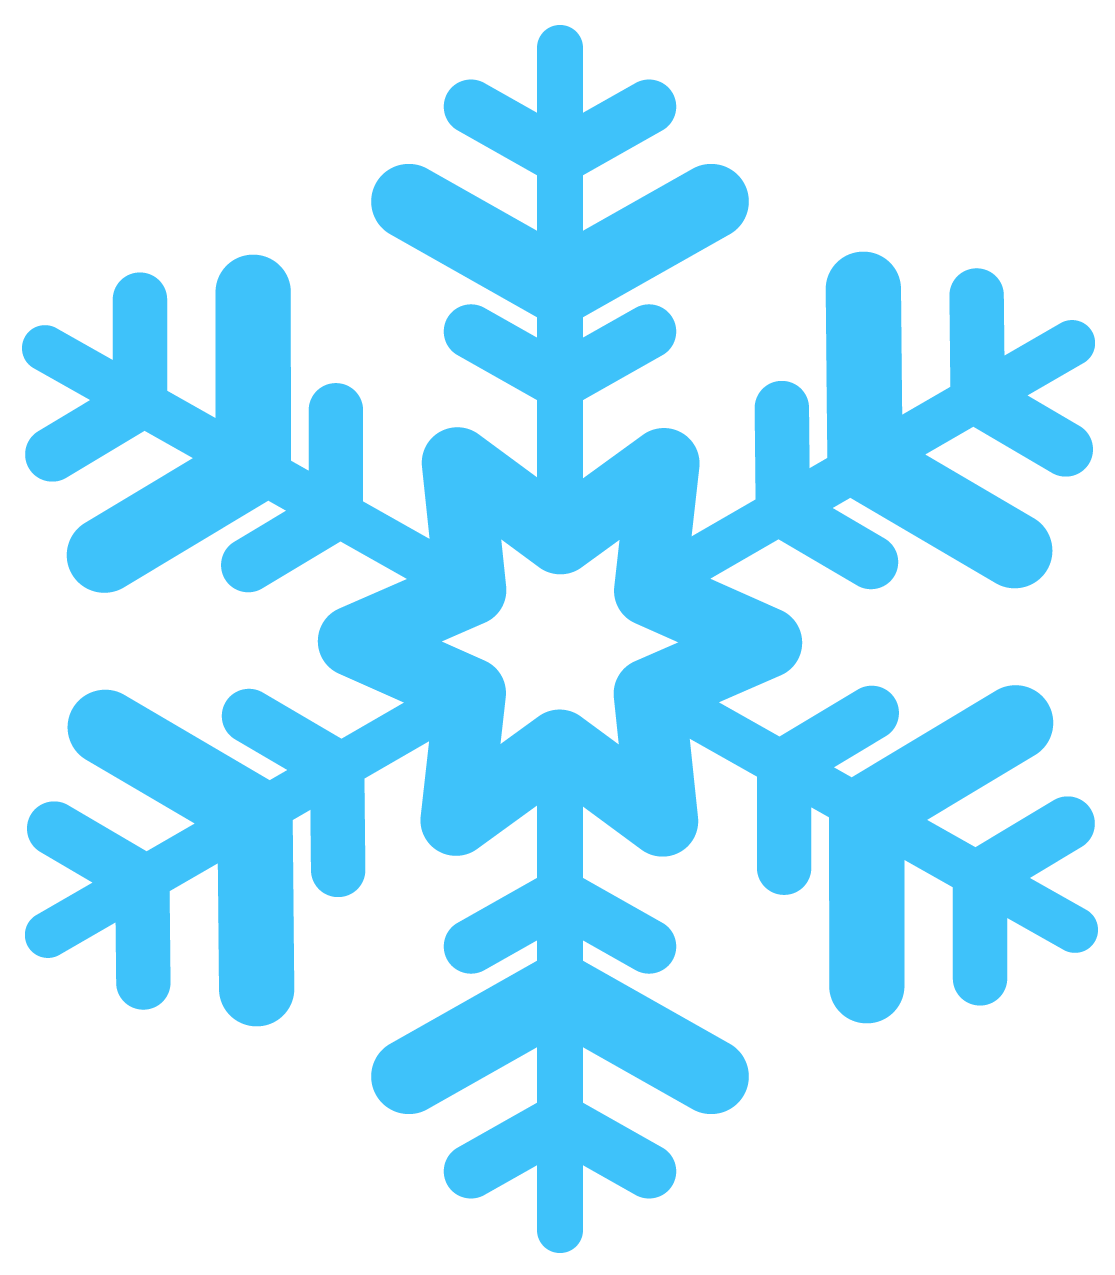 Snowflake File Snowflakes Free Download PNG HQ Clipart